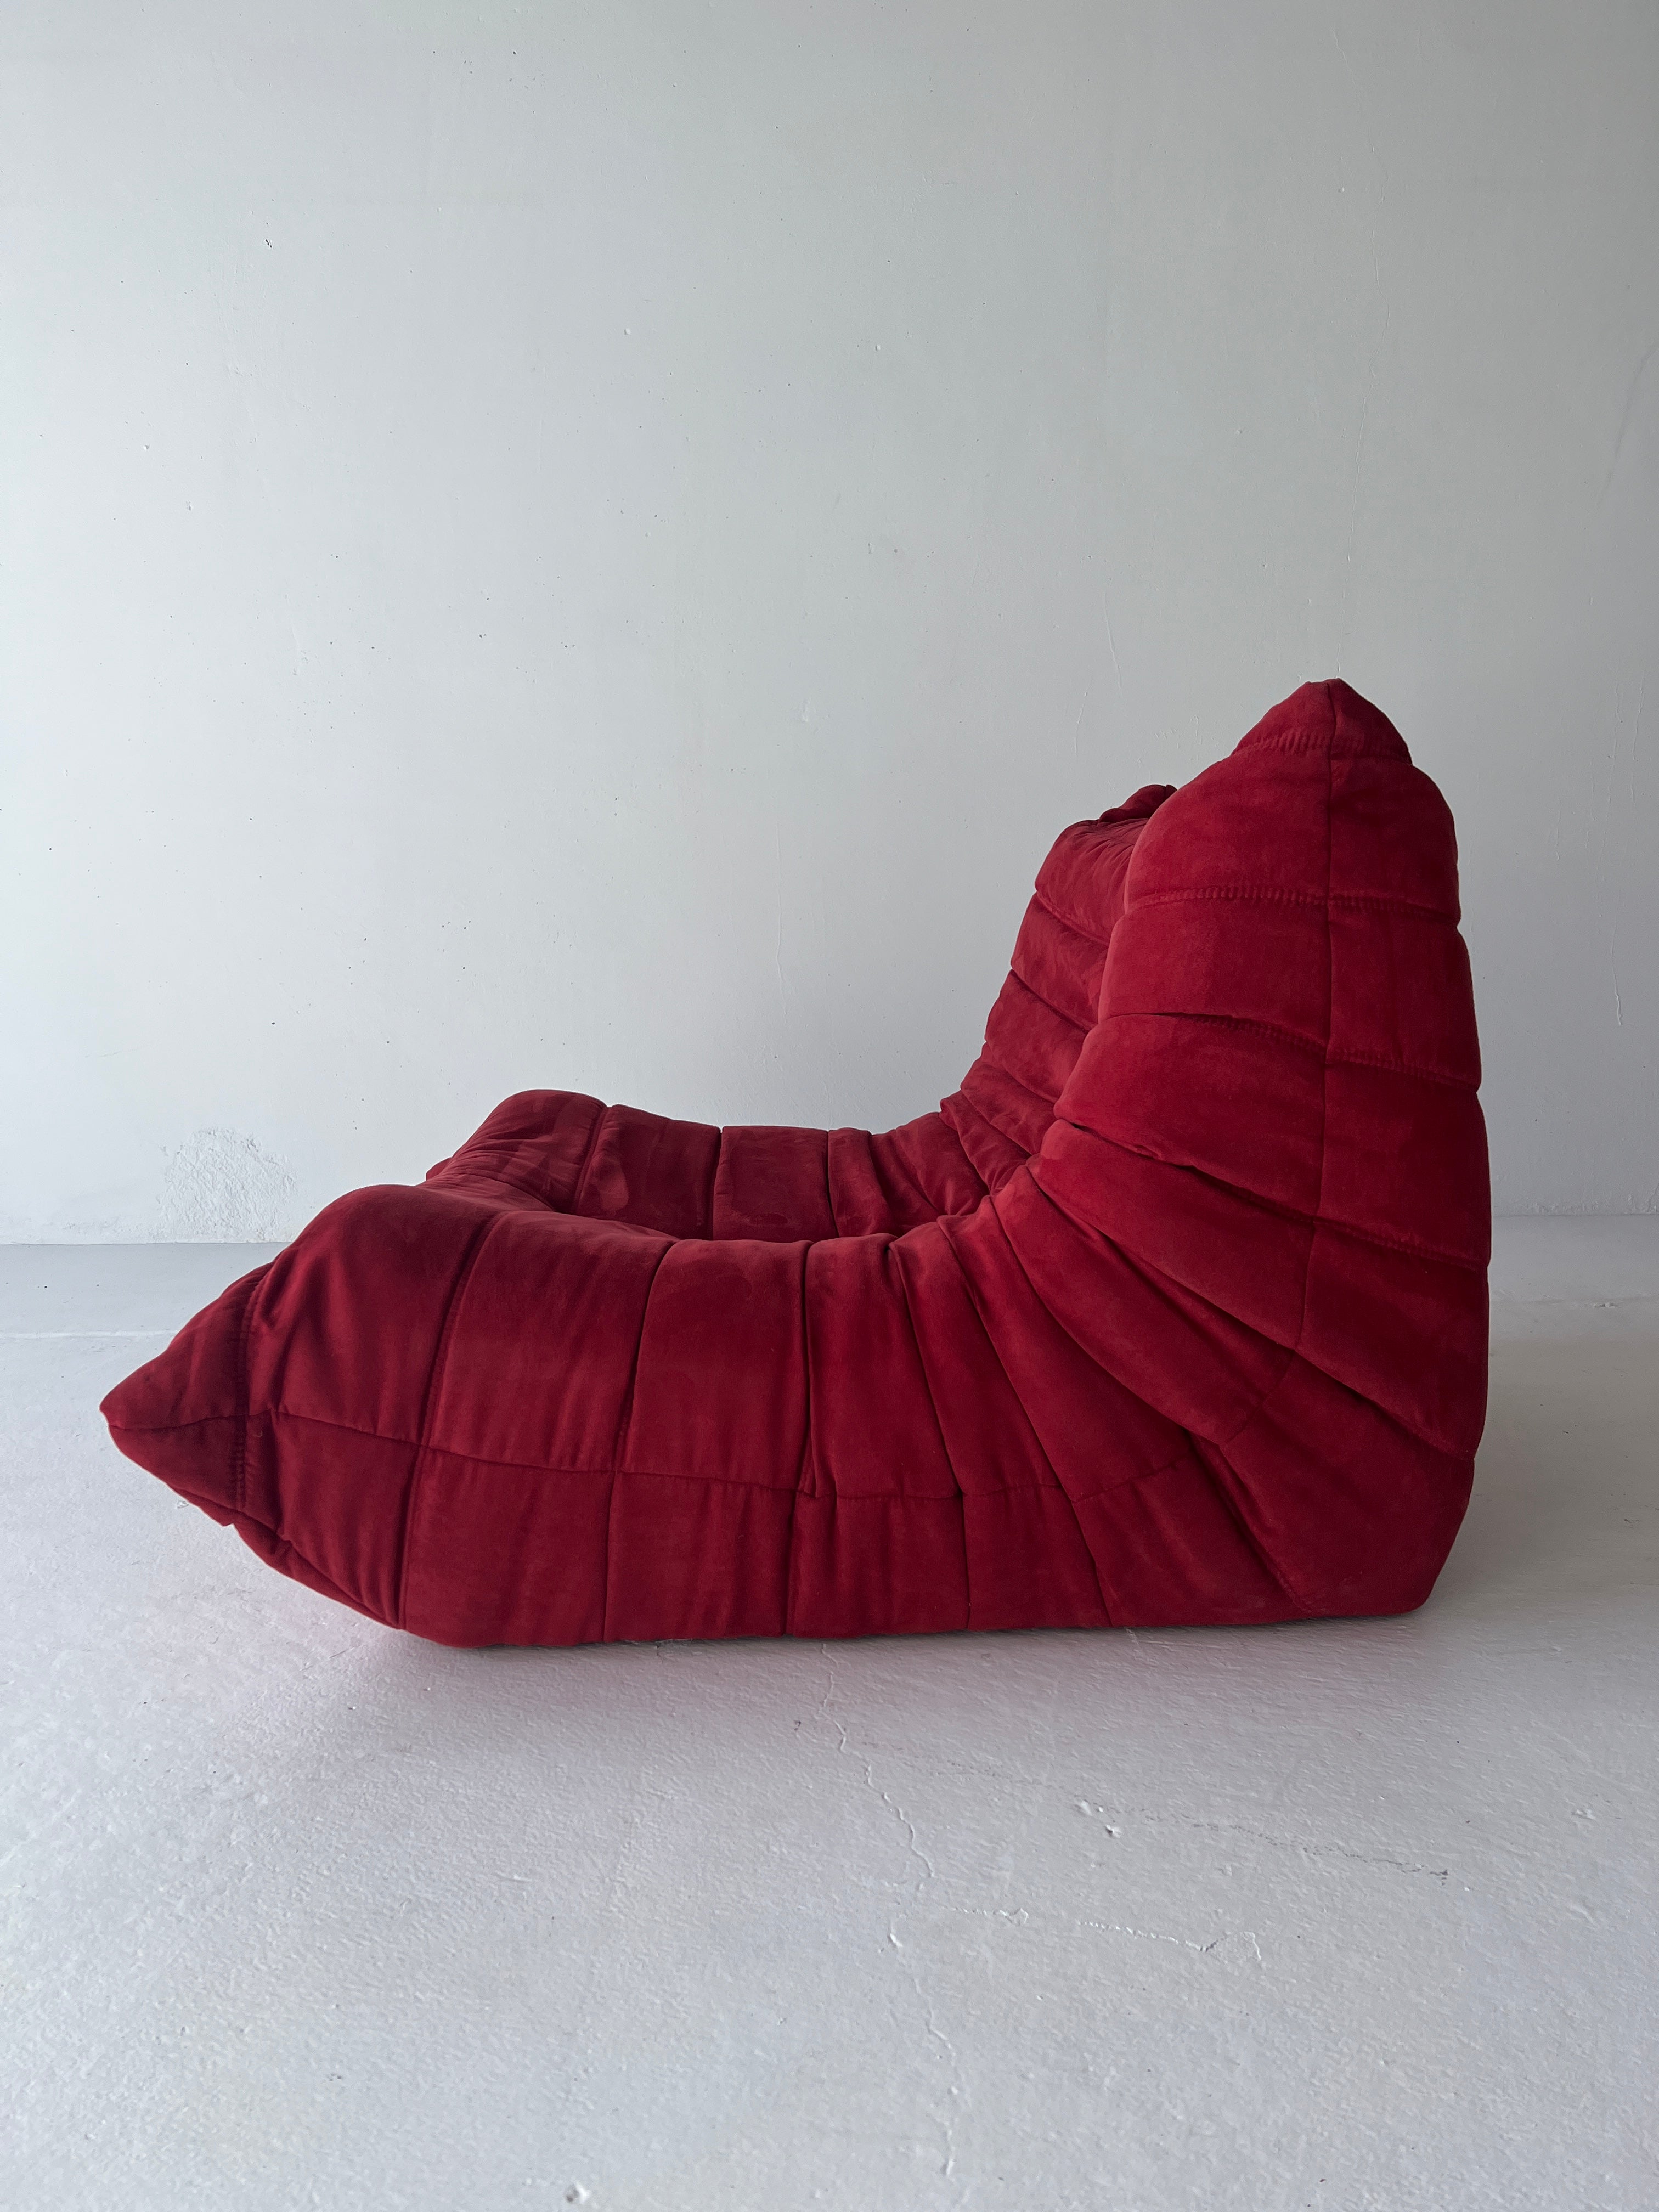 Red Togo Style fireside Chair